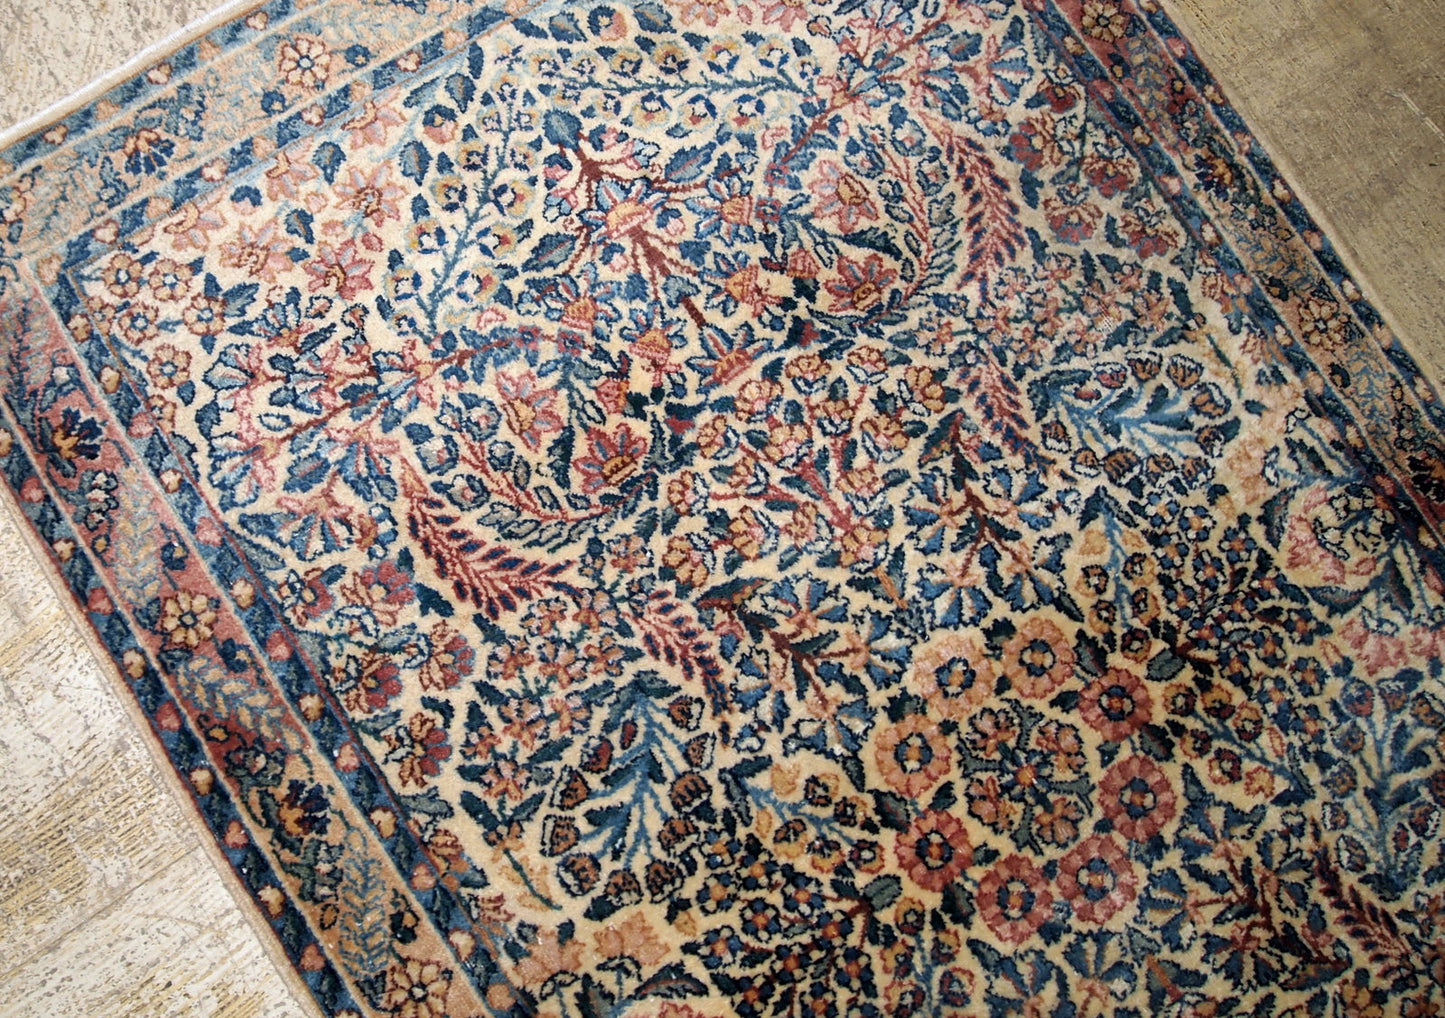 Hand made antique Kerman rug in original good condition from the beginning of 20th century. The rug in in beige shade and with classic floral design.